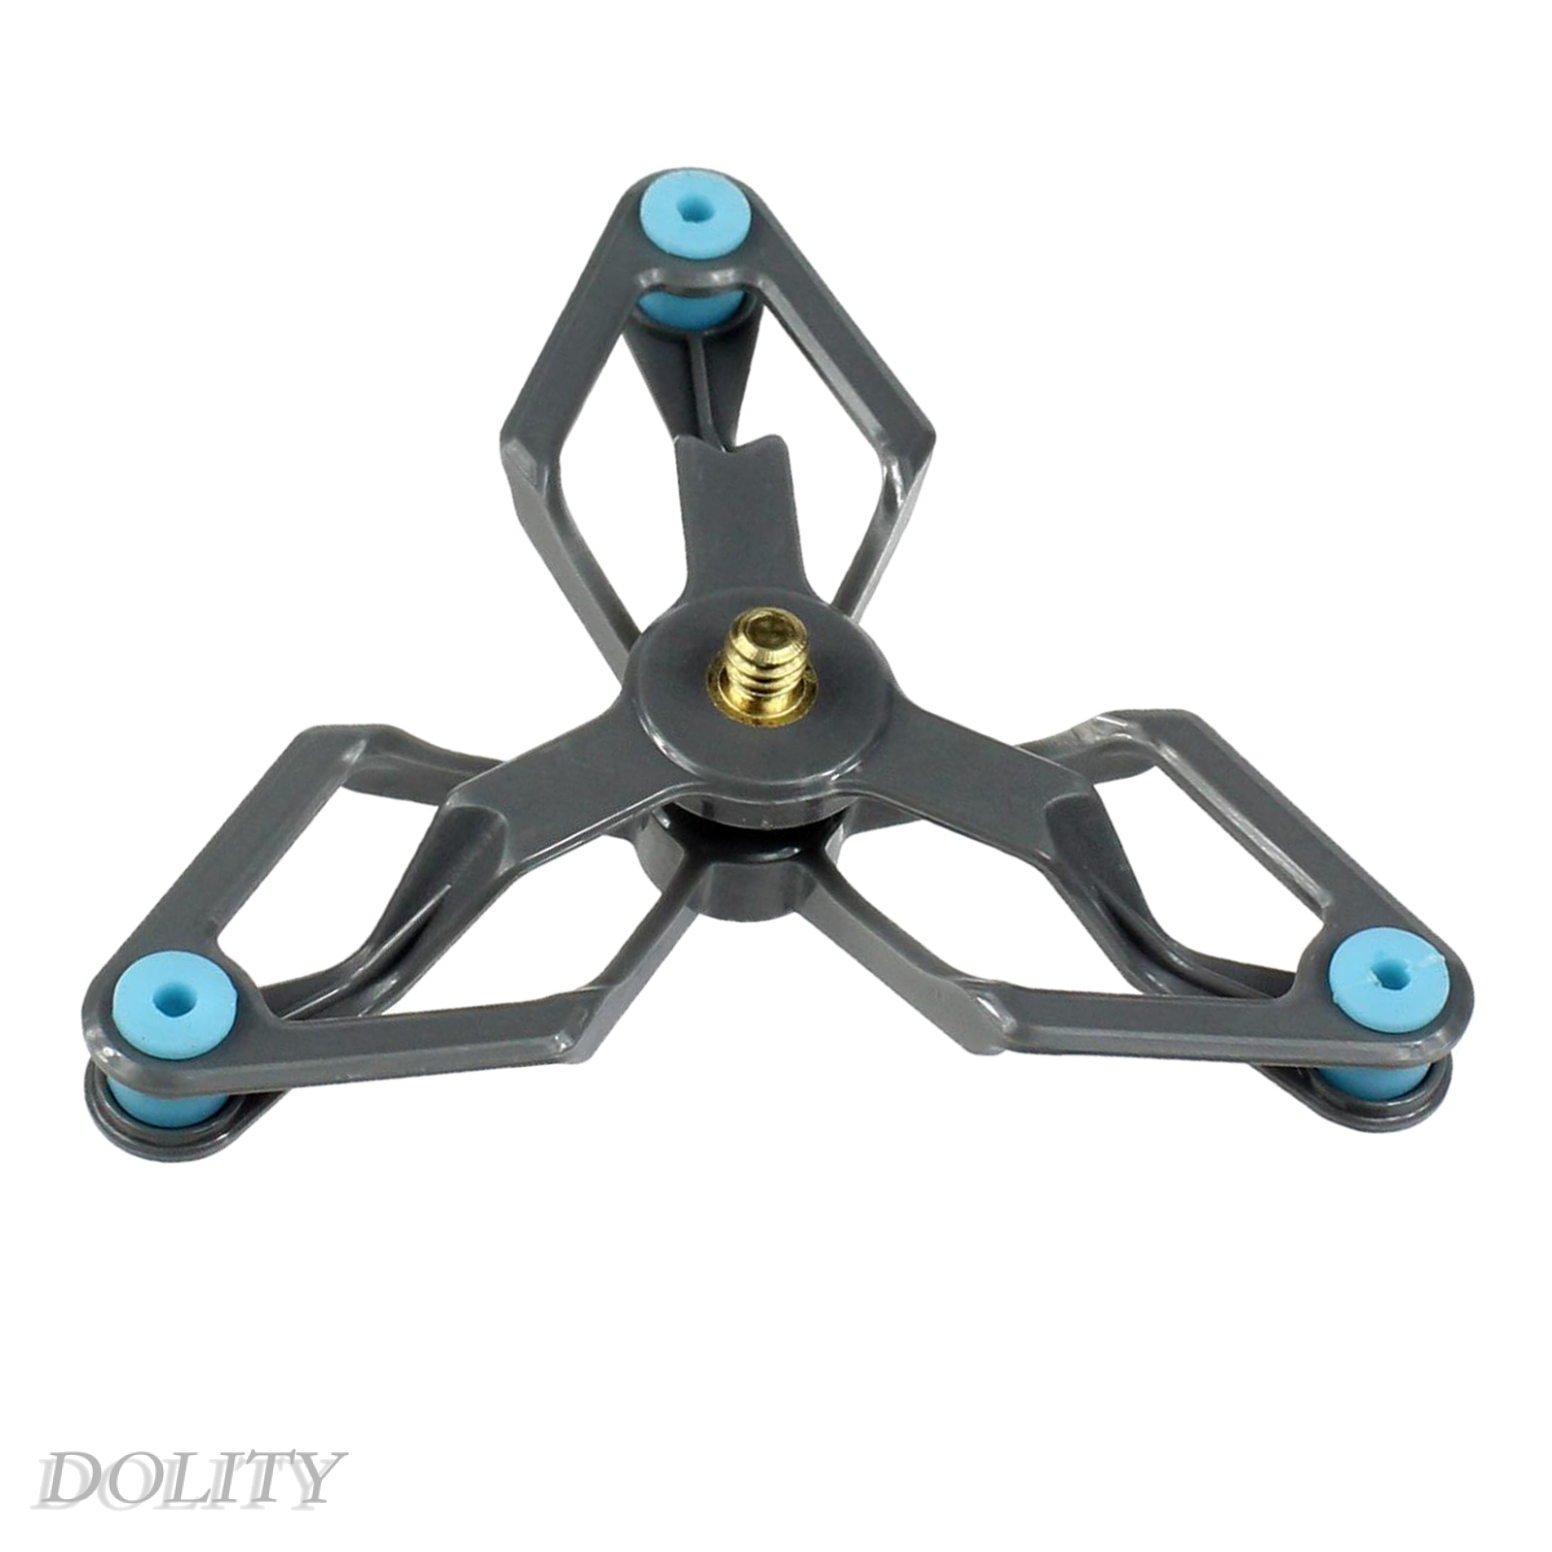 [DOLITY]Sports Camera Shock Absorber 1/4 Screw for DJI OSMO Action Camera Stabilizer